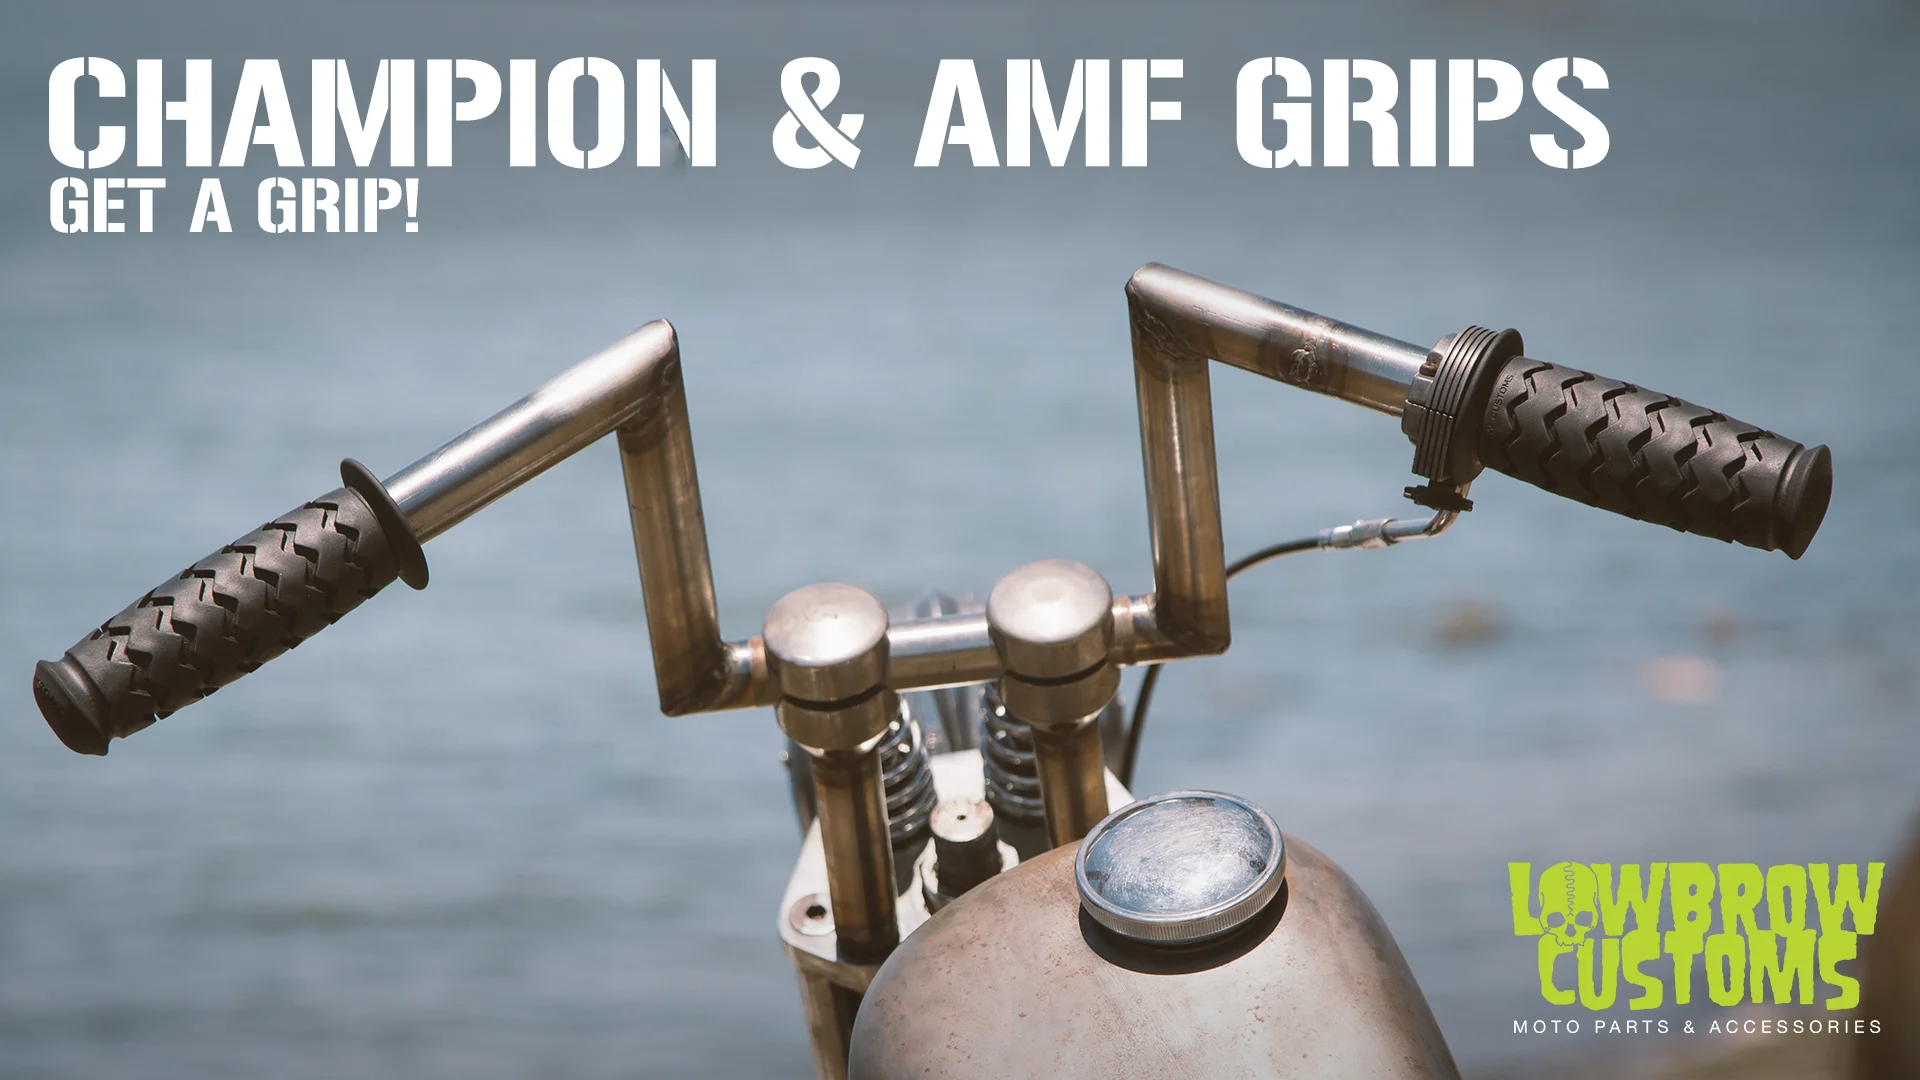 Lowbrow Customs Champion & AMF Motorcycle Grips Coming Out Soon for  Harley-Davidson, Choppers & More on Vimeo